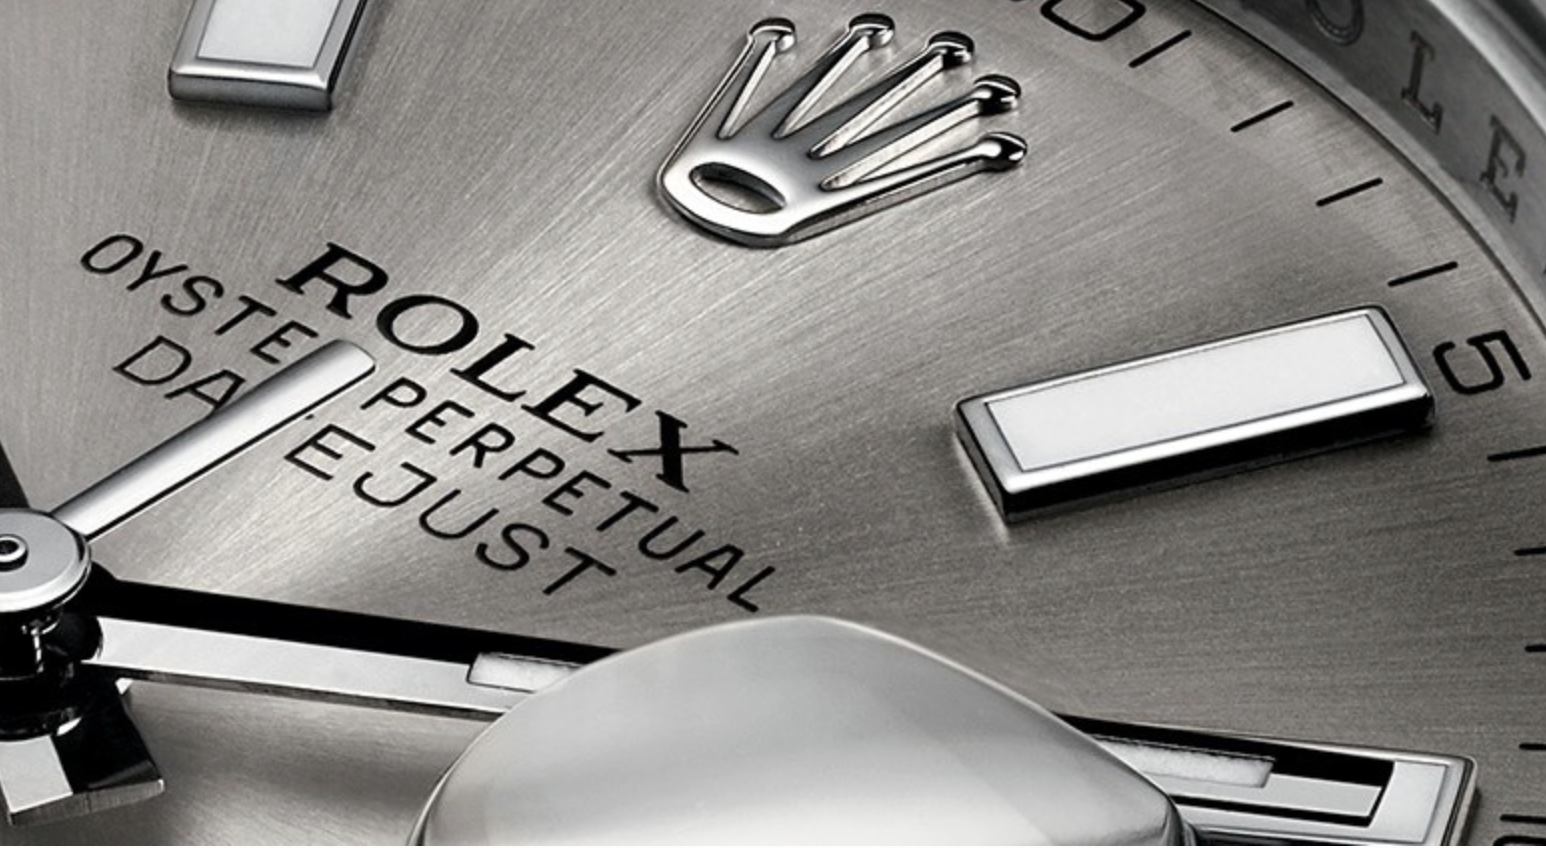 Things You Should Know About the Brand Rolex